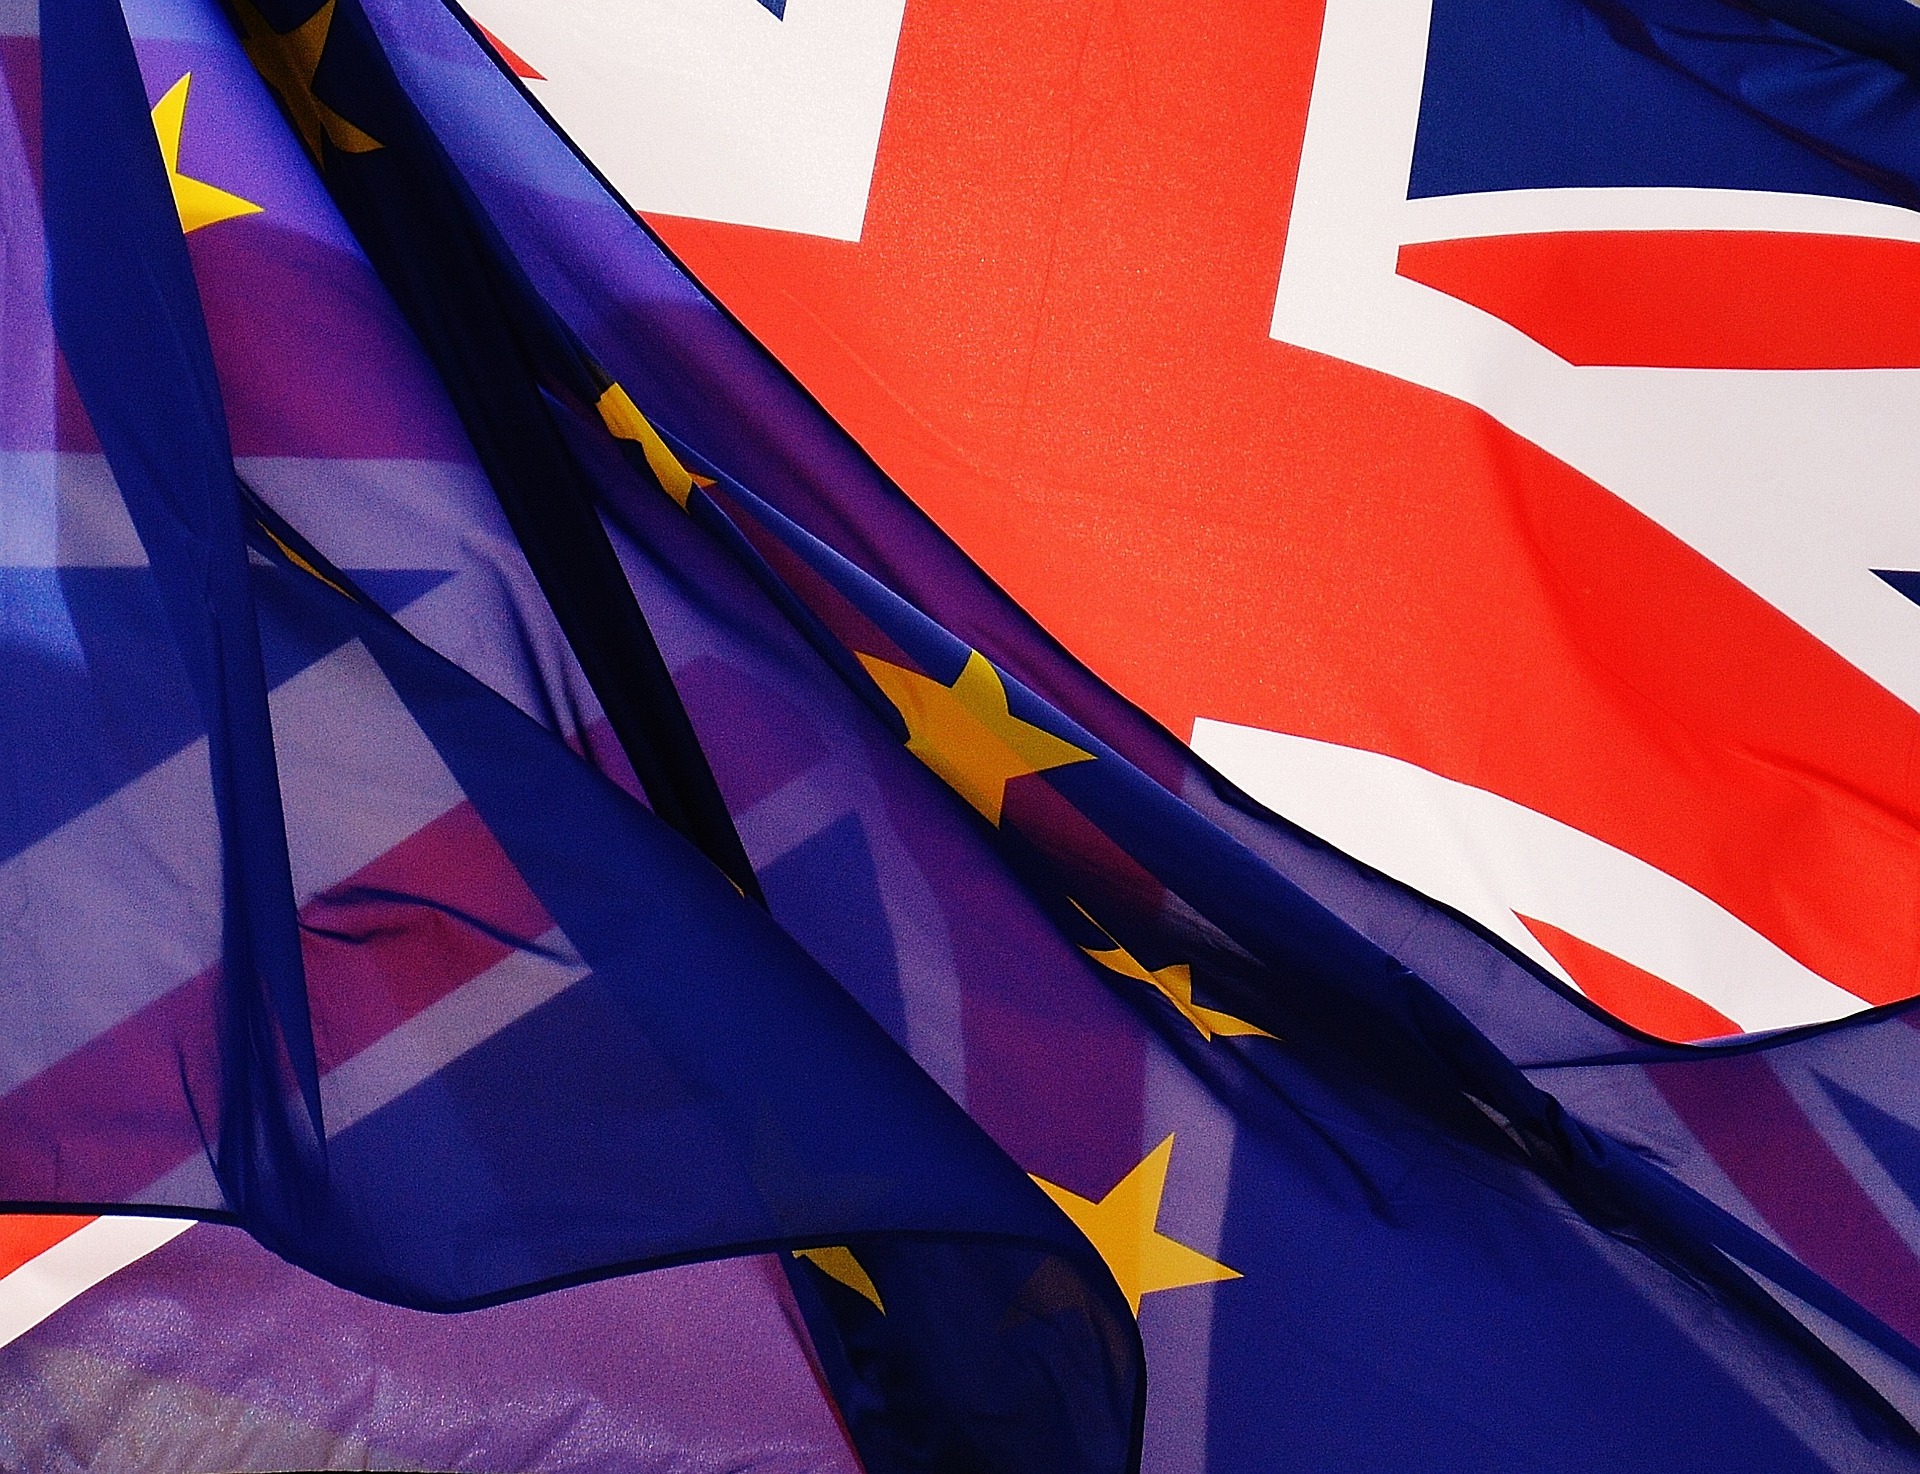 HOW CAN UNIVERSITIES TACKLE THE CHALLENGES AND EXPLOIT THE OPPORTUNITIES OF BREXIT?